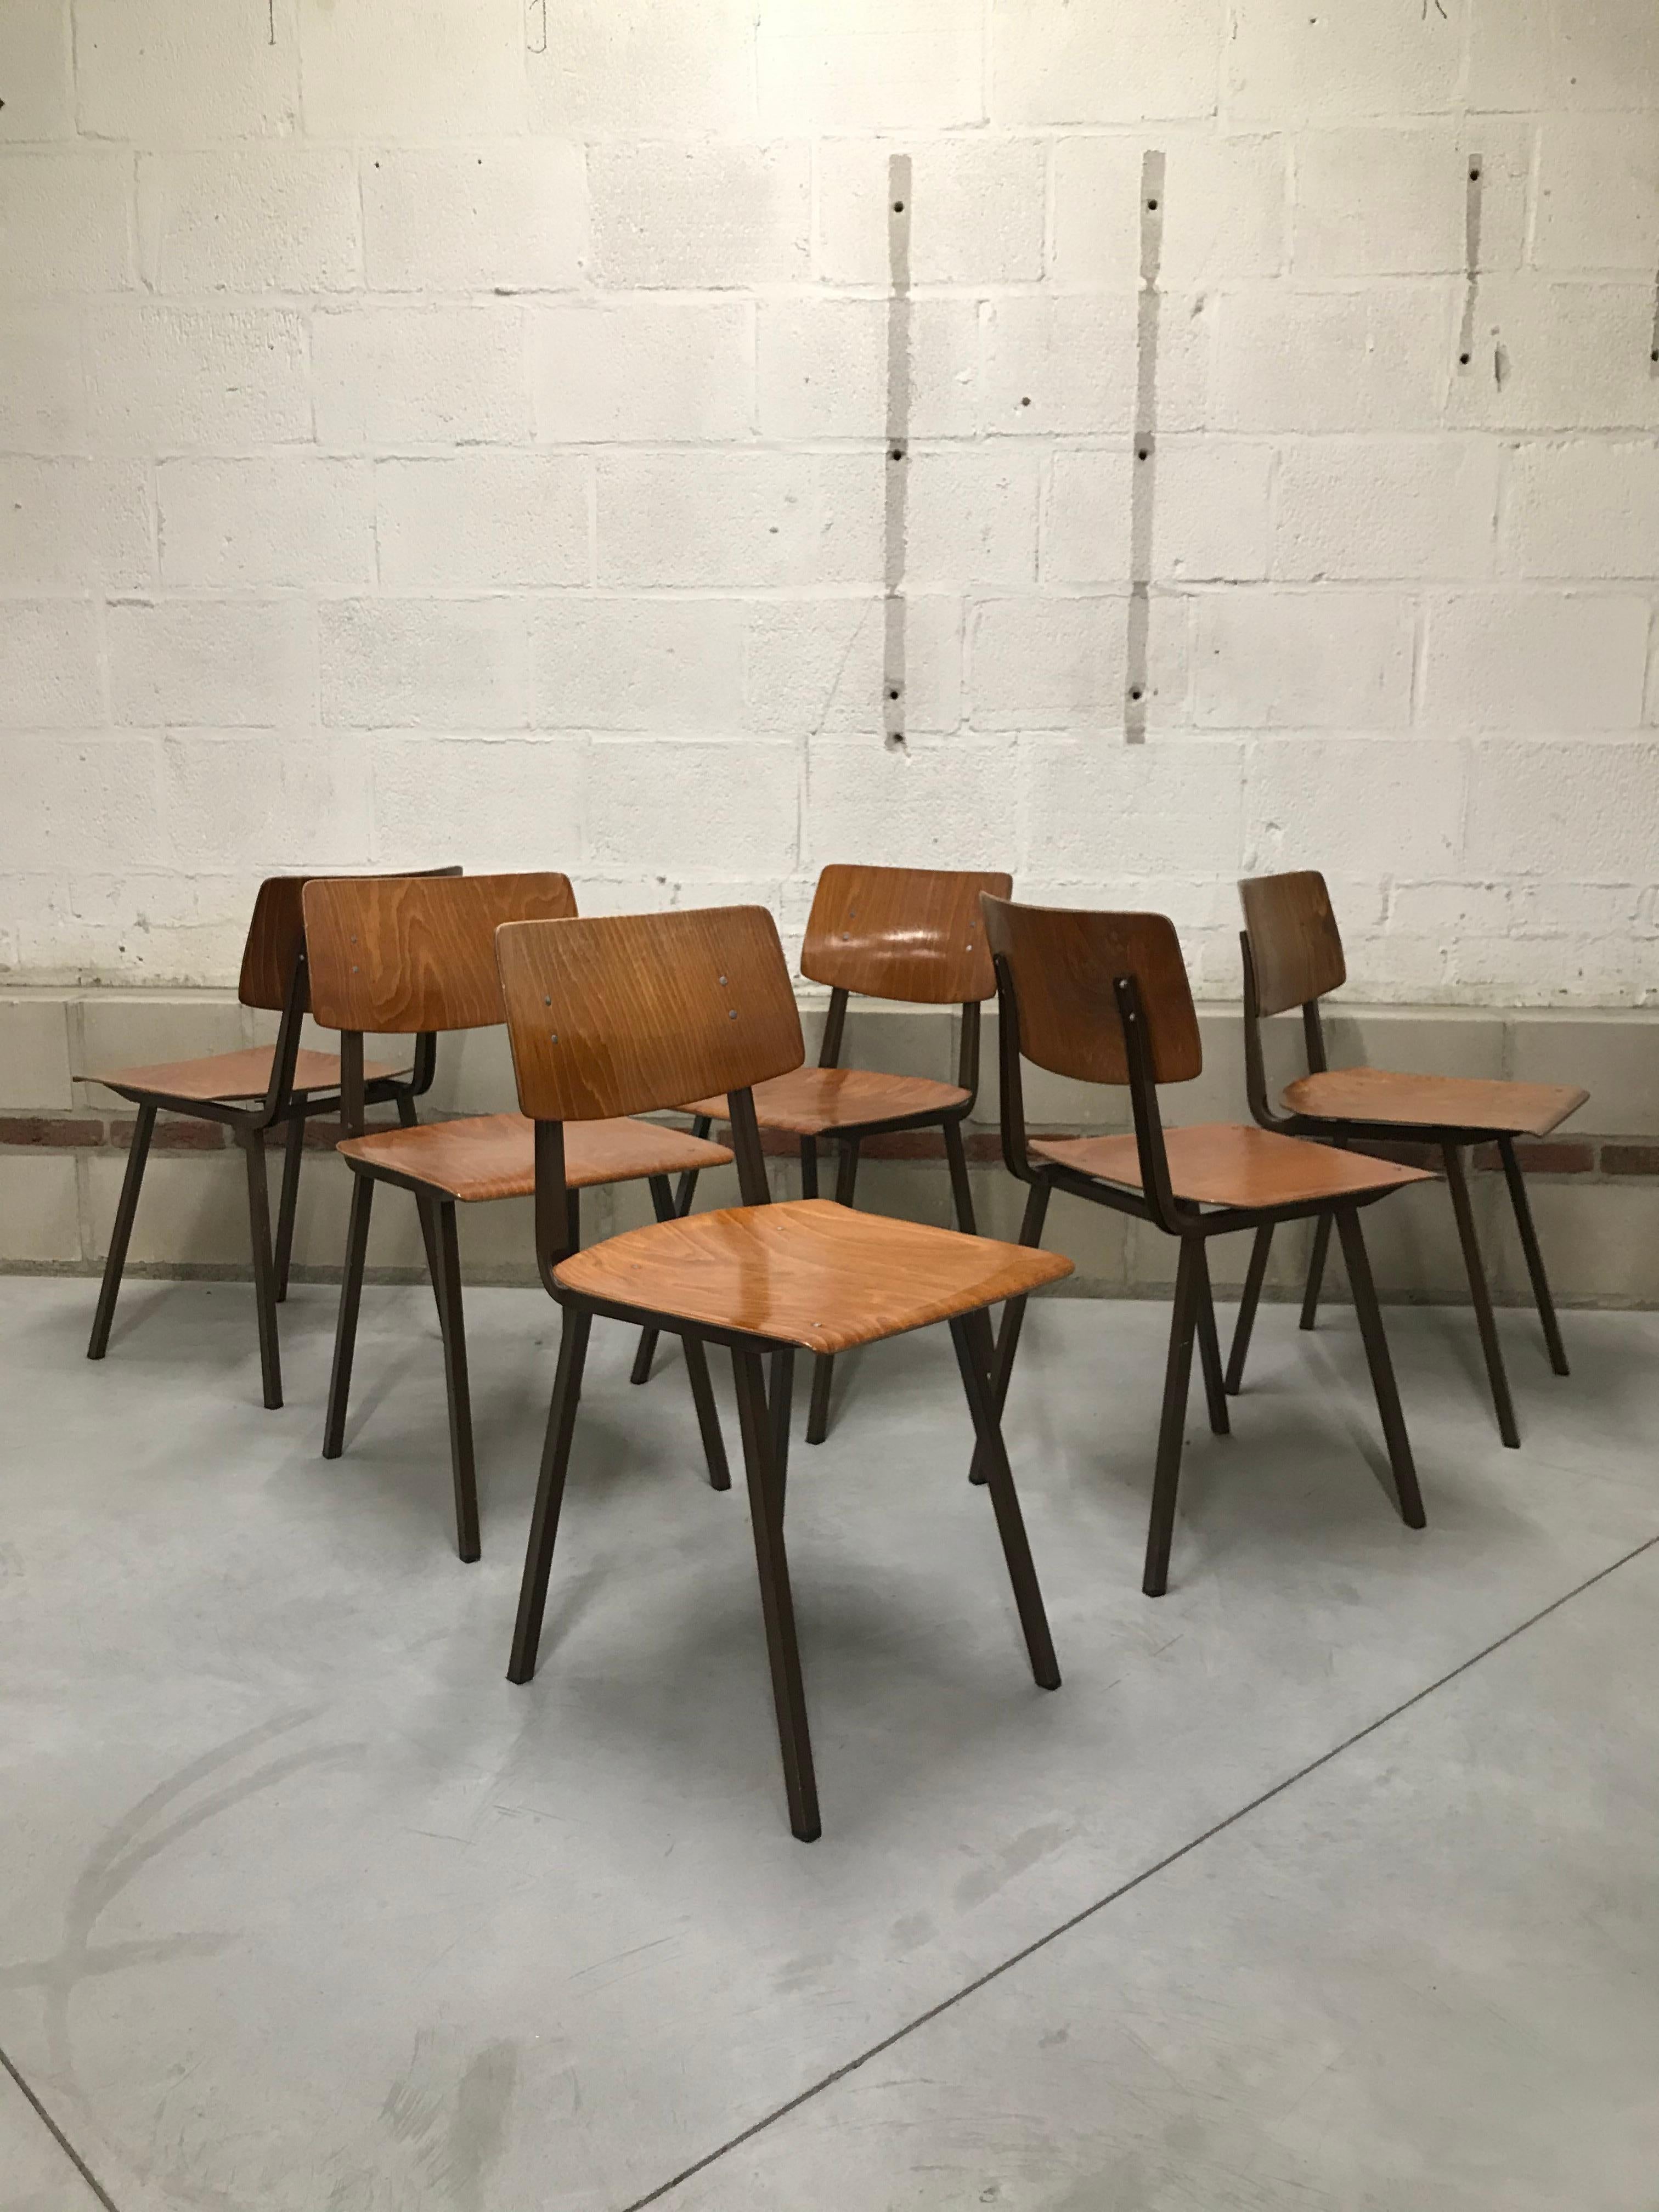 Set of 6 1950s Marko Dutch school chairs, made from metal and pressed wood.
The height is 79.5 cm, width is 39.5 cm, the diameter is 41 cm and the seat height is 45.5 cm.